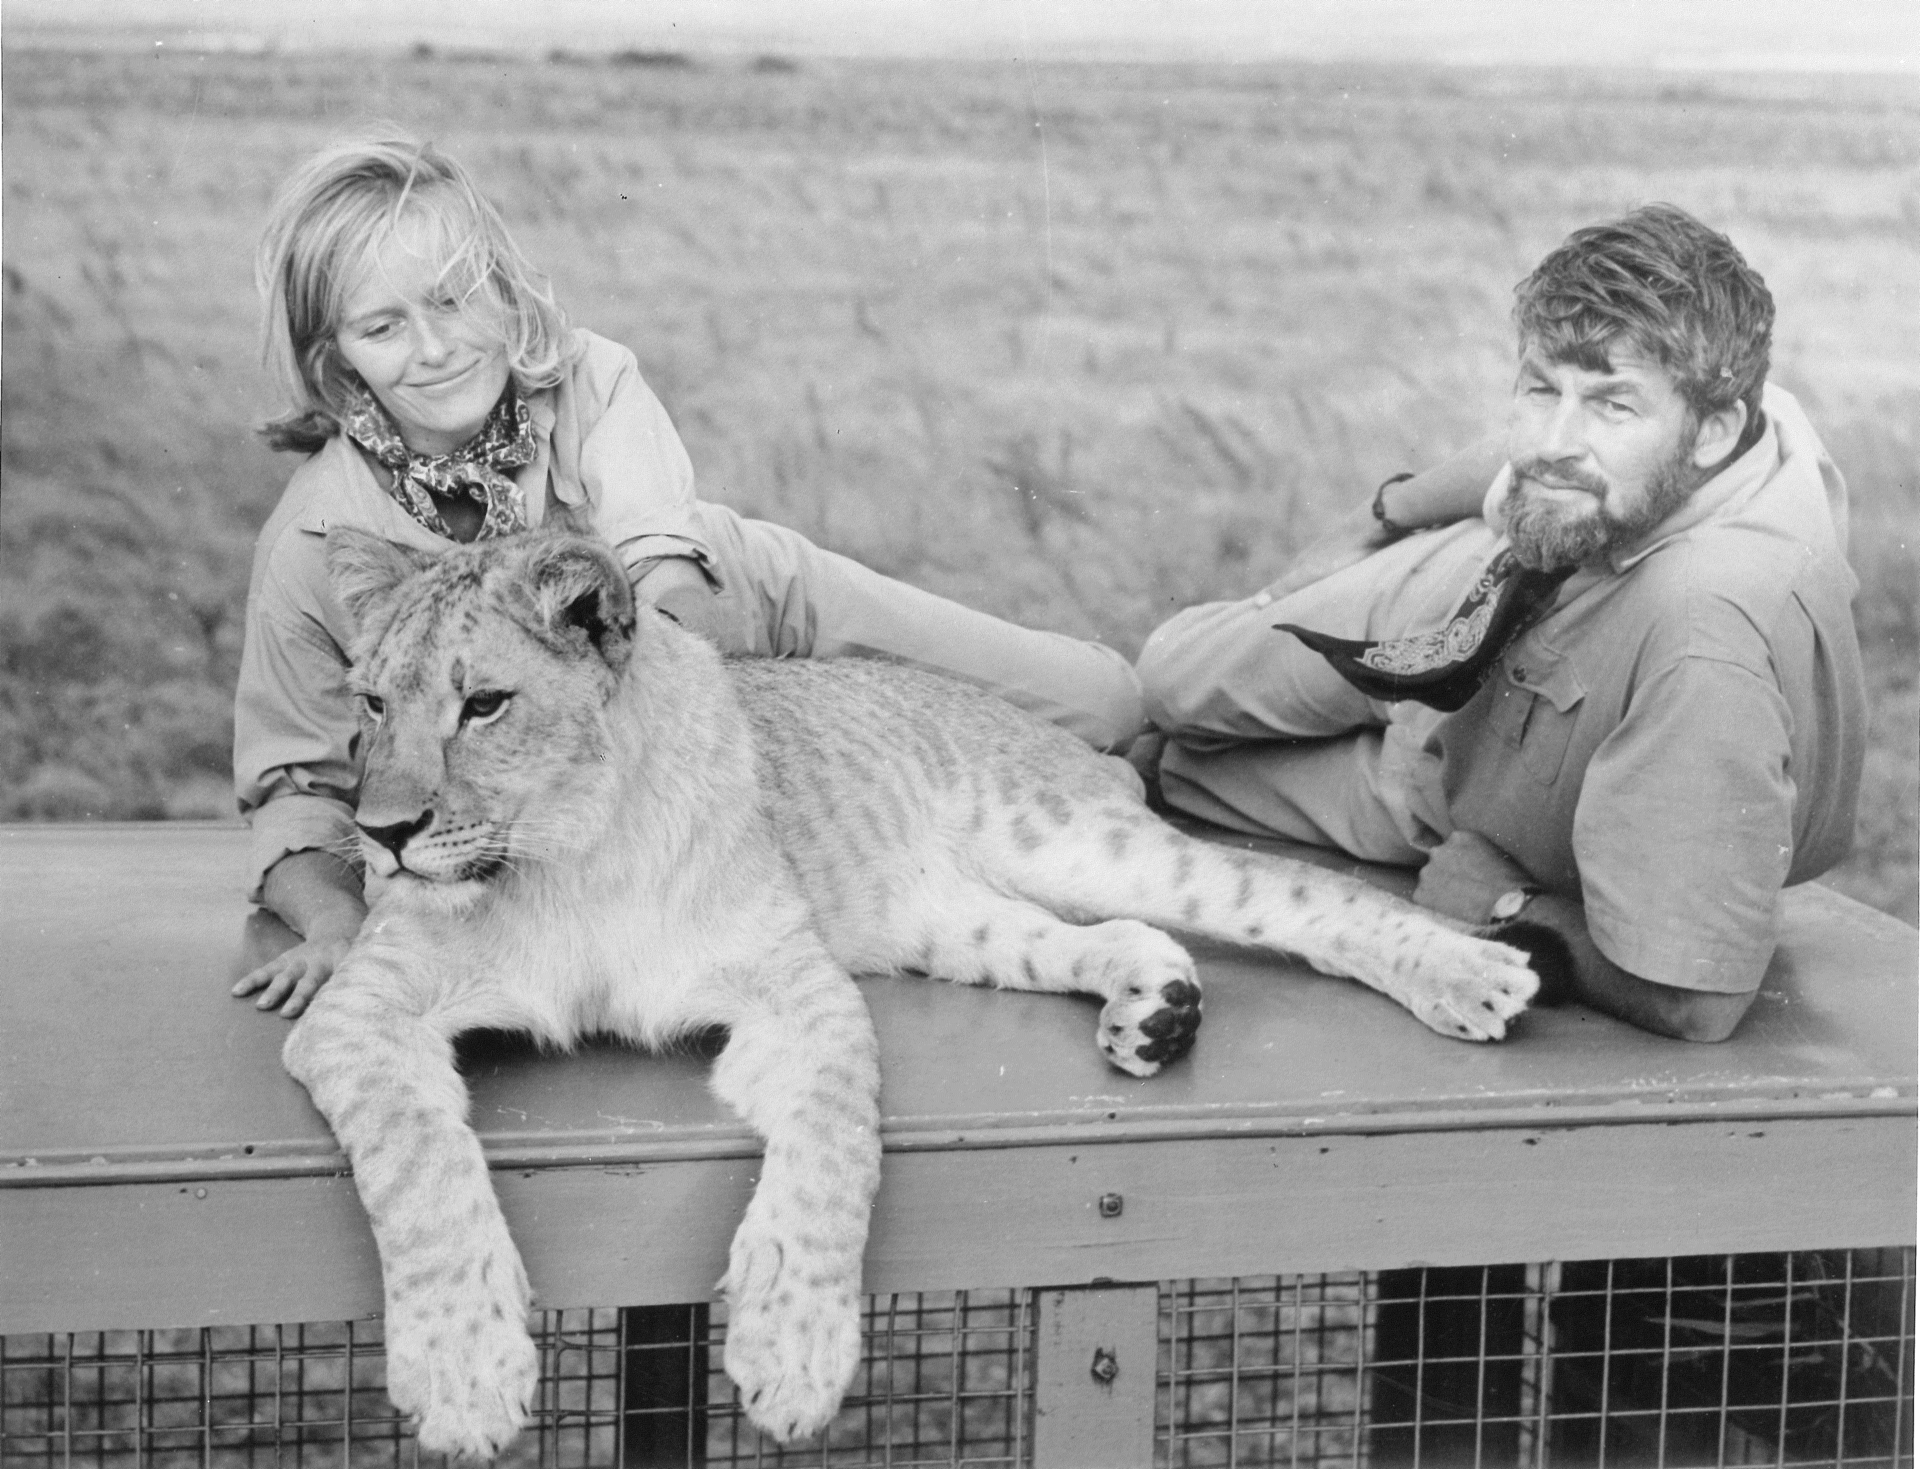 Charity co-founders Virginia McKenna OBE and her late husband Bill Travers MBE starred in the 1966 film Born Free.